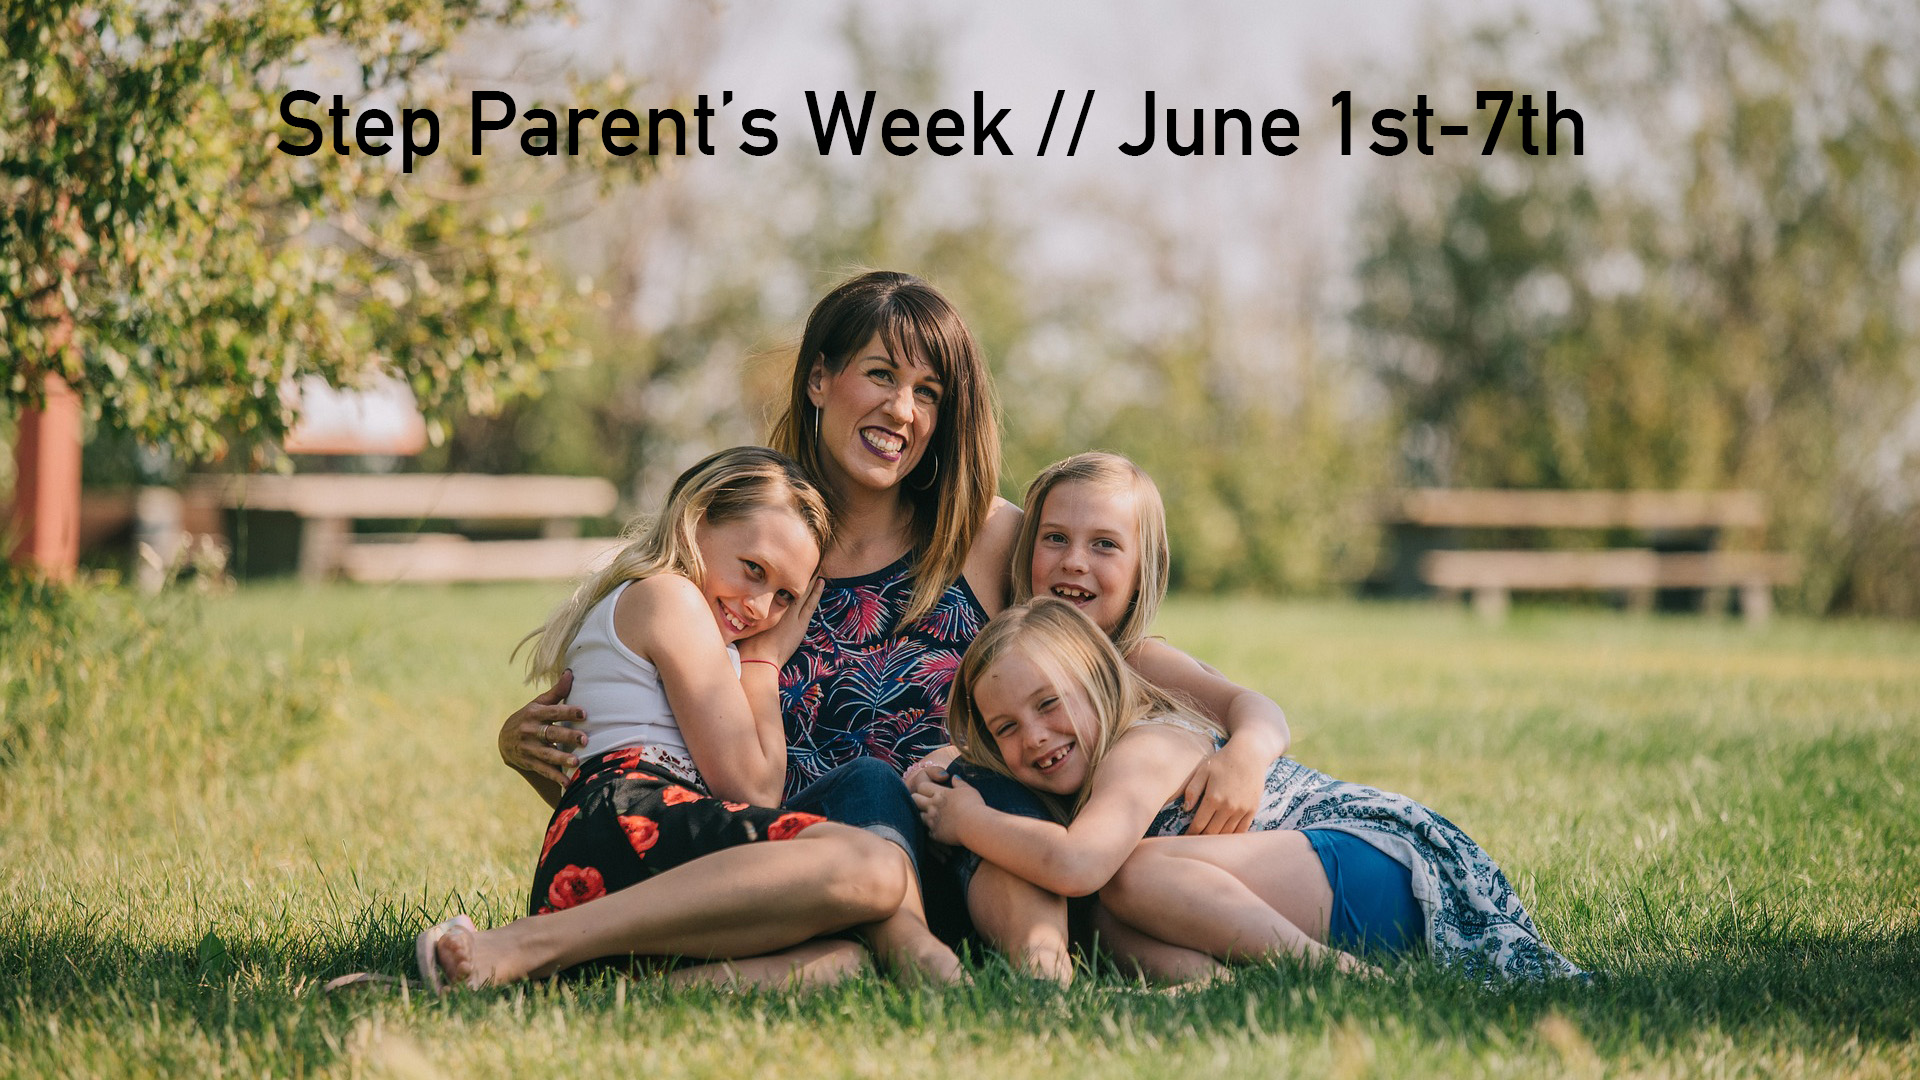 Photo of a middle age women with 3 little girls hugging her while sitting on the grass. Step Parent's Week // June 1st - 7th is written across the top of the screen in black.